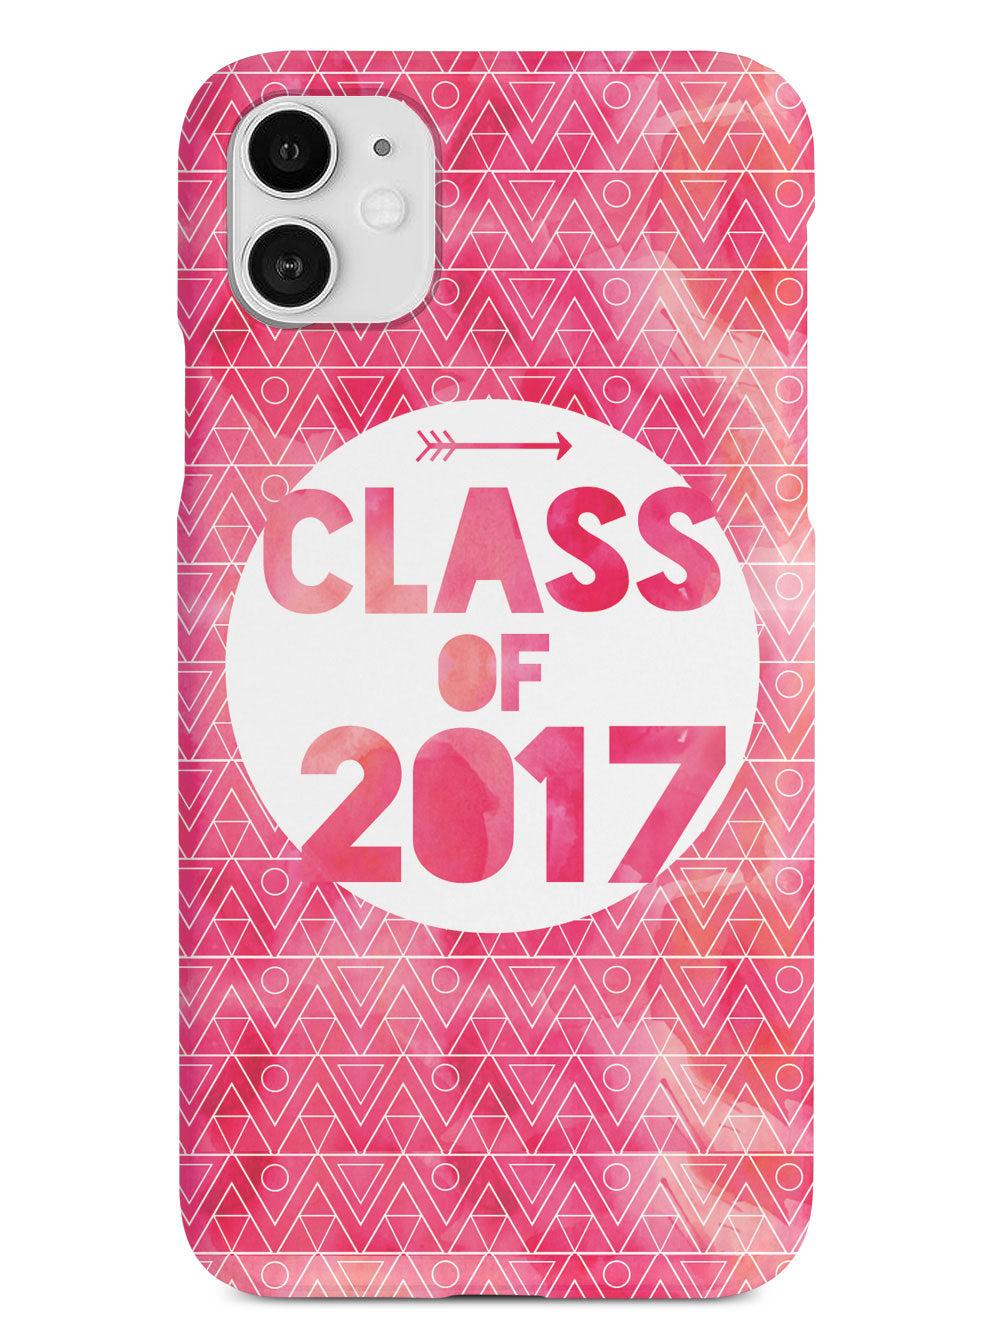 Class of 2017 - Pink Watercolor Case